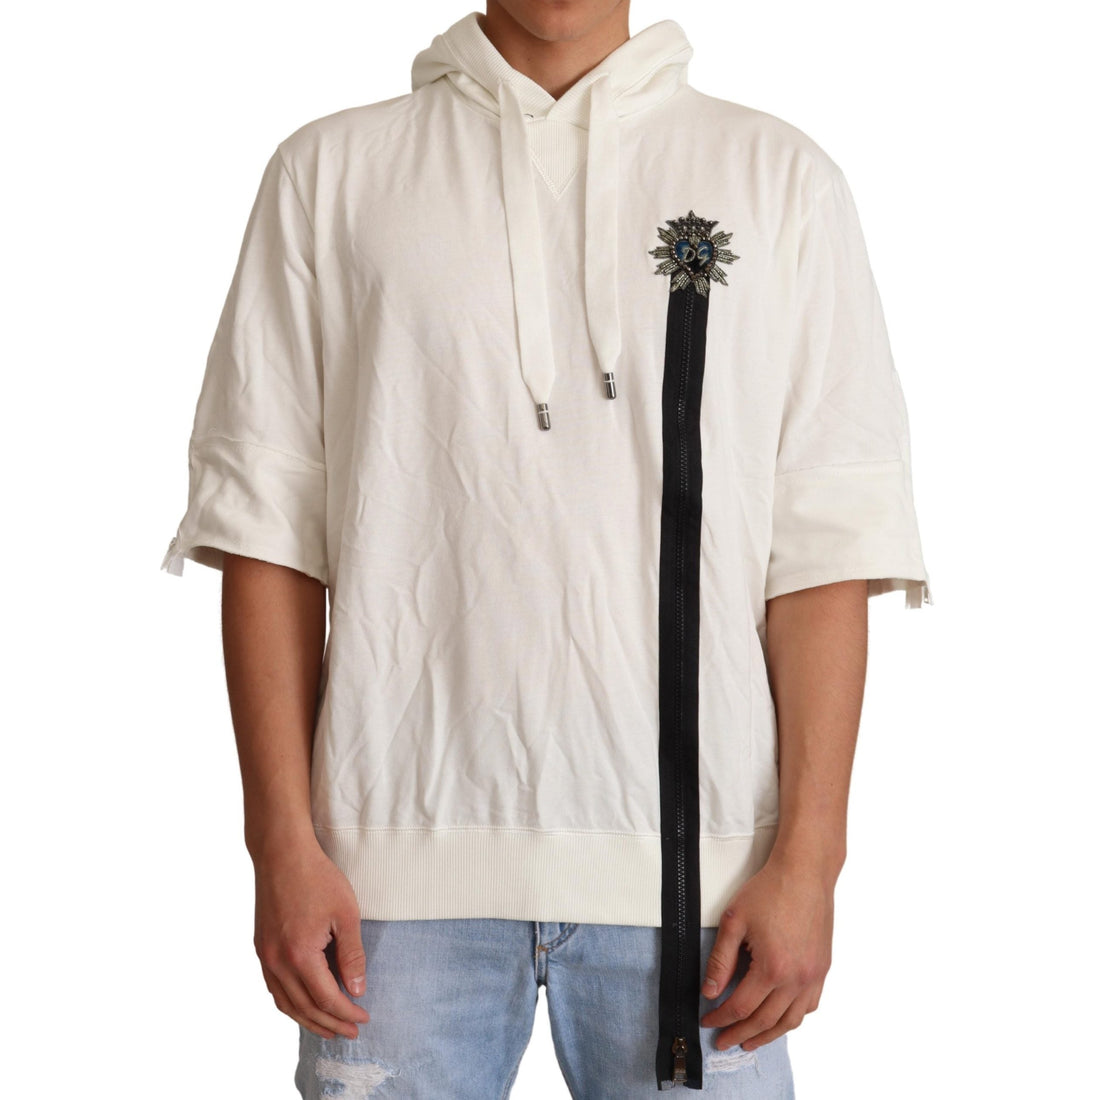 Dolce & Gabbana White Hooded Limited Edition Sweater - Paris Deluxe